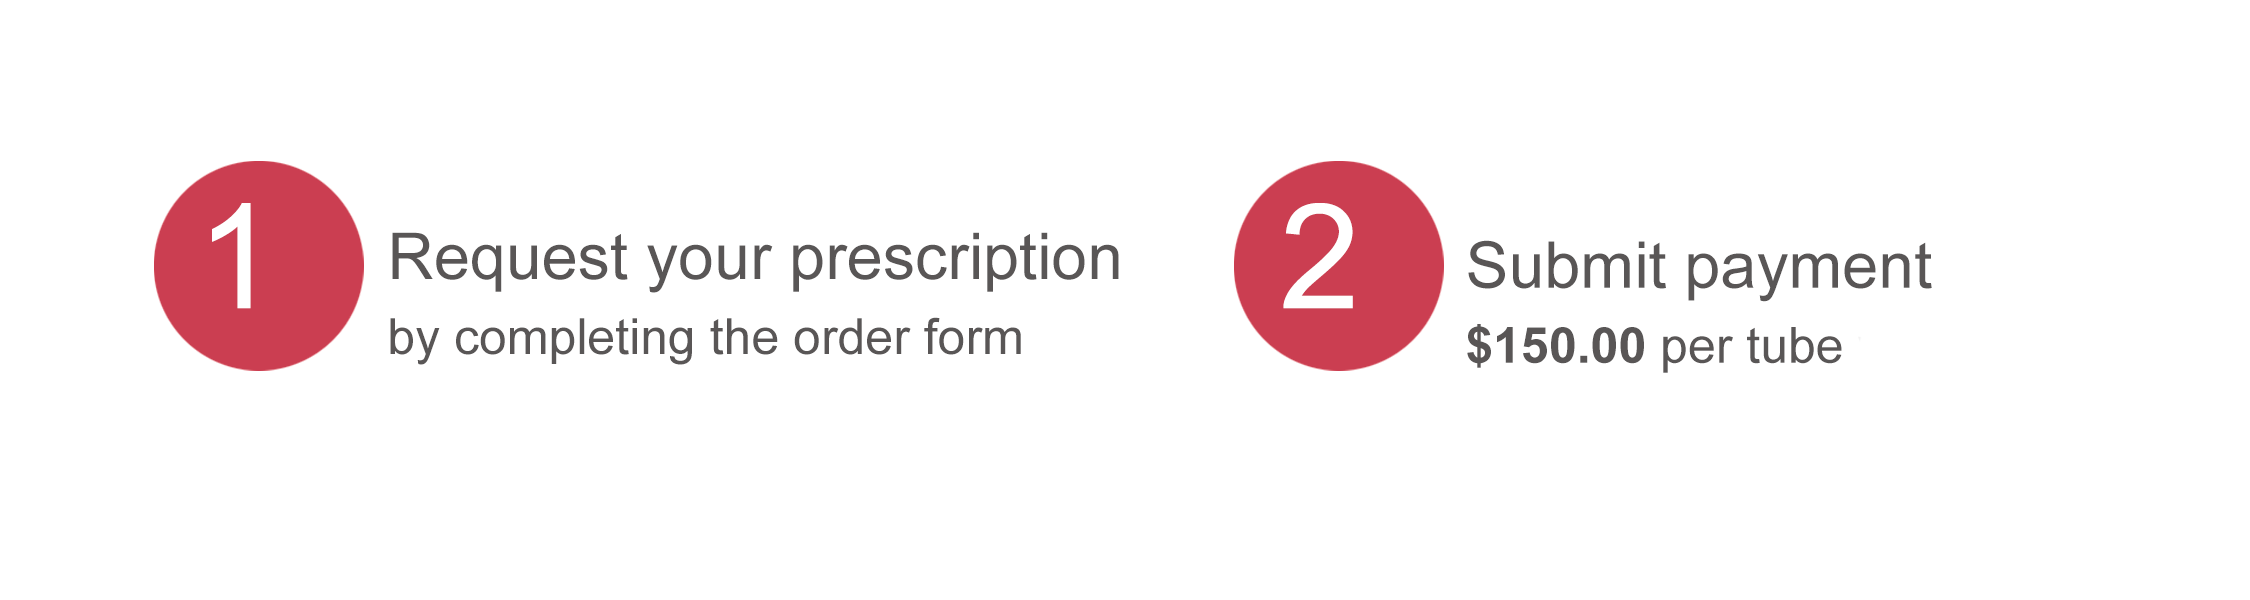 STEP 1: Request your prescription | STEP 2: Submit payment